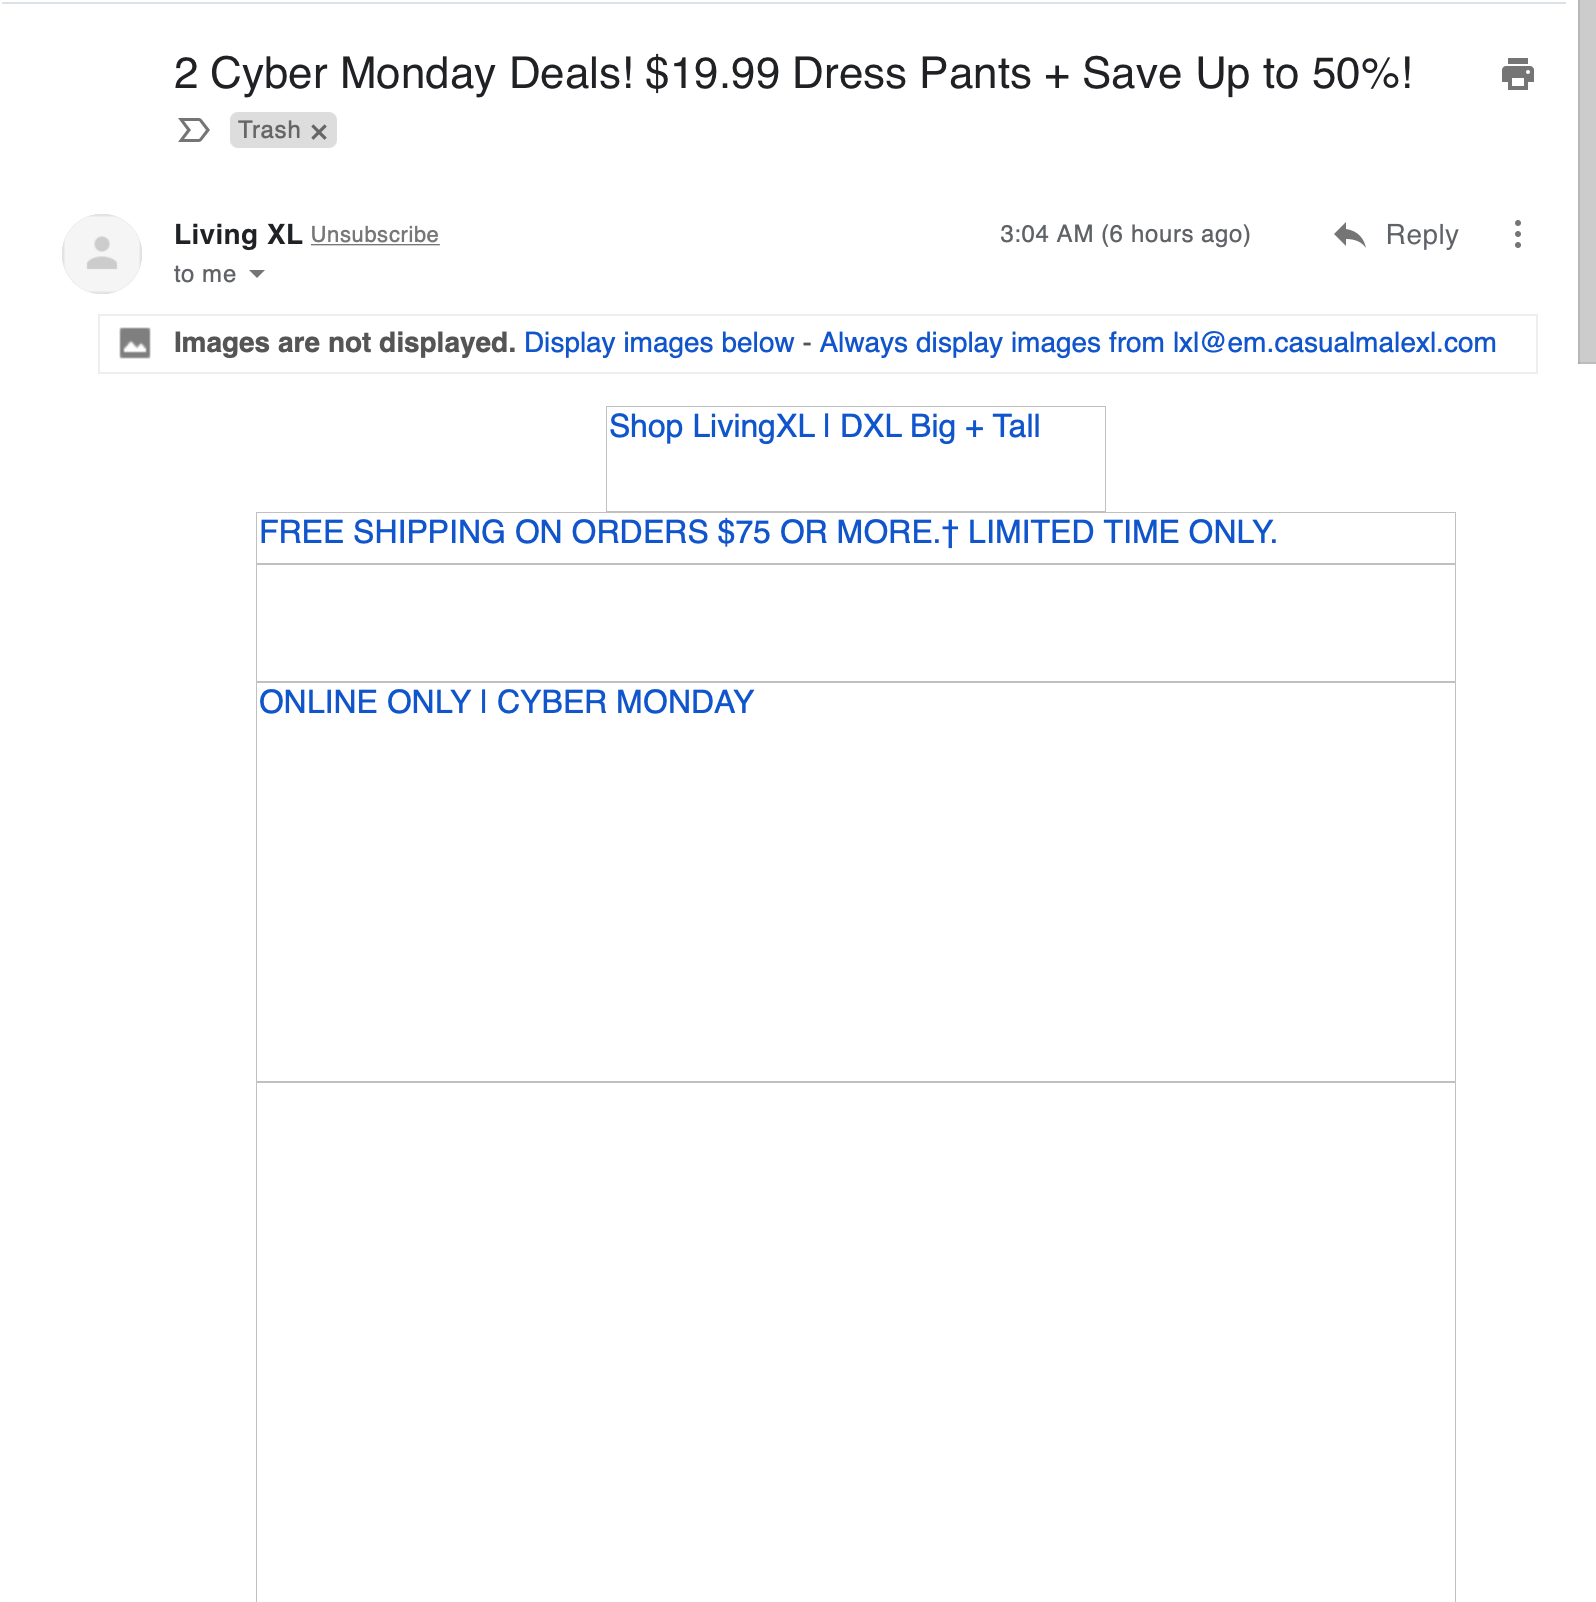 Email from Living XL before loading images